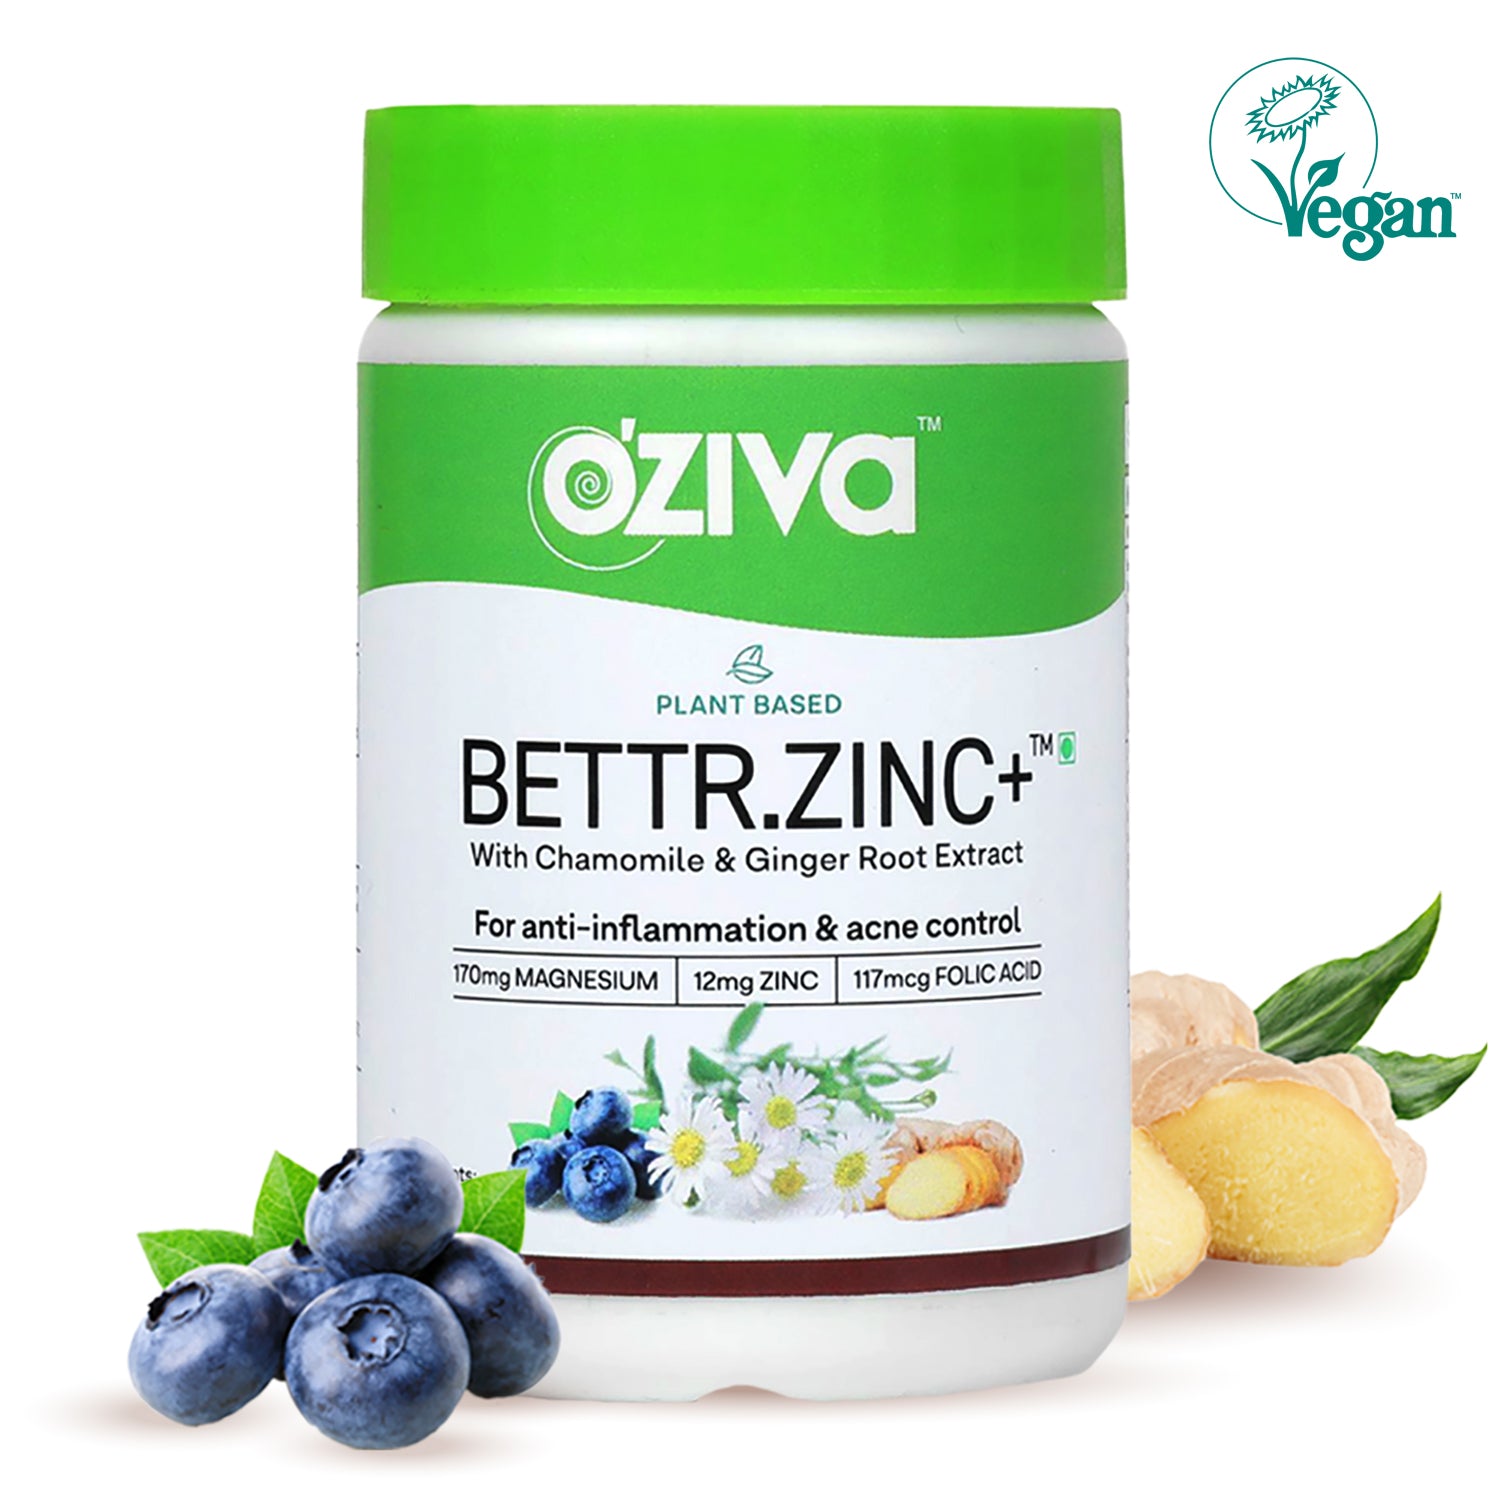 Plant Based Zinc Supplements for Acne Control